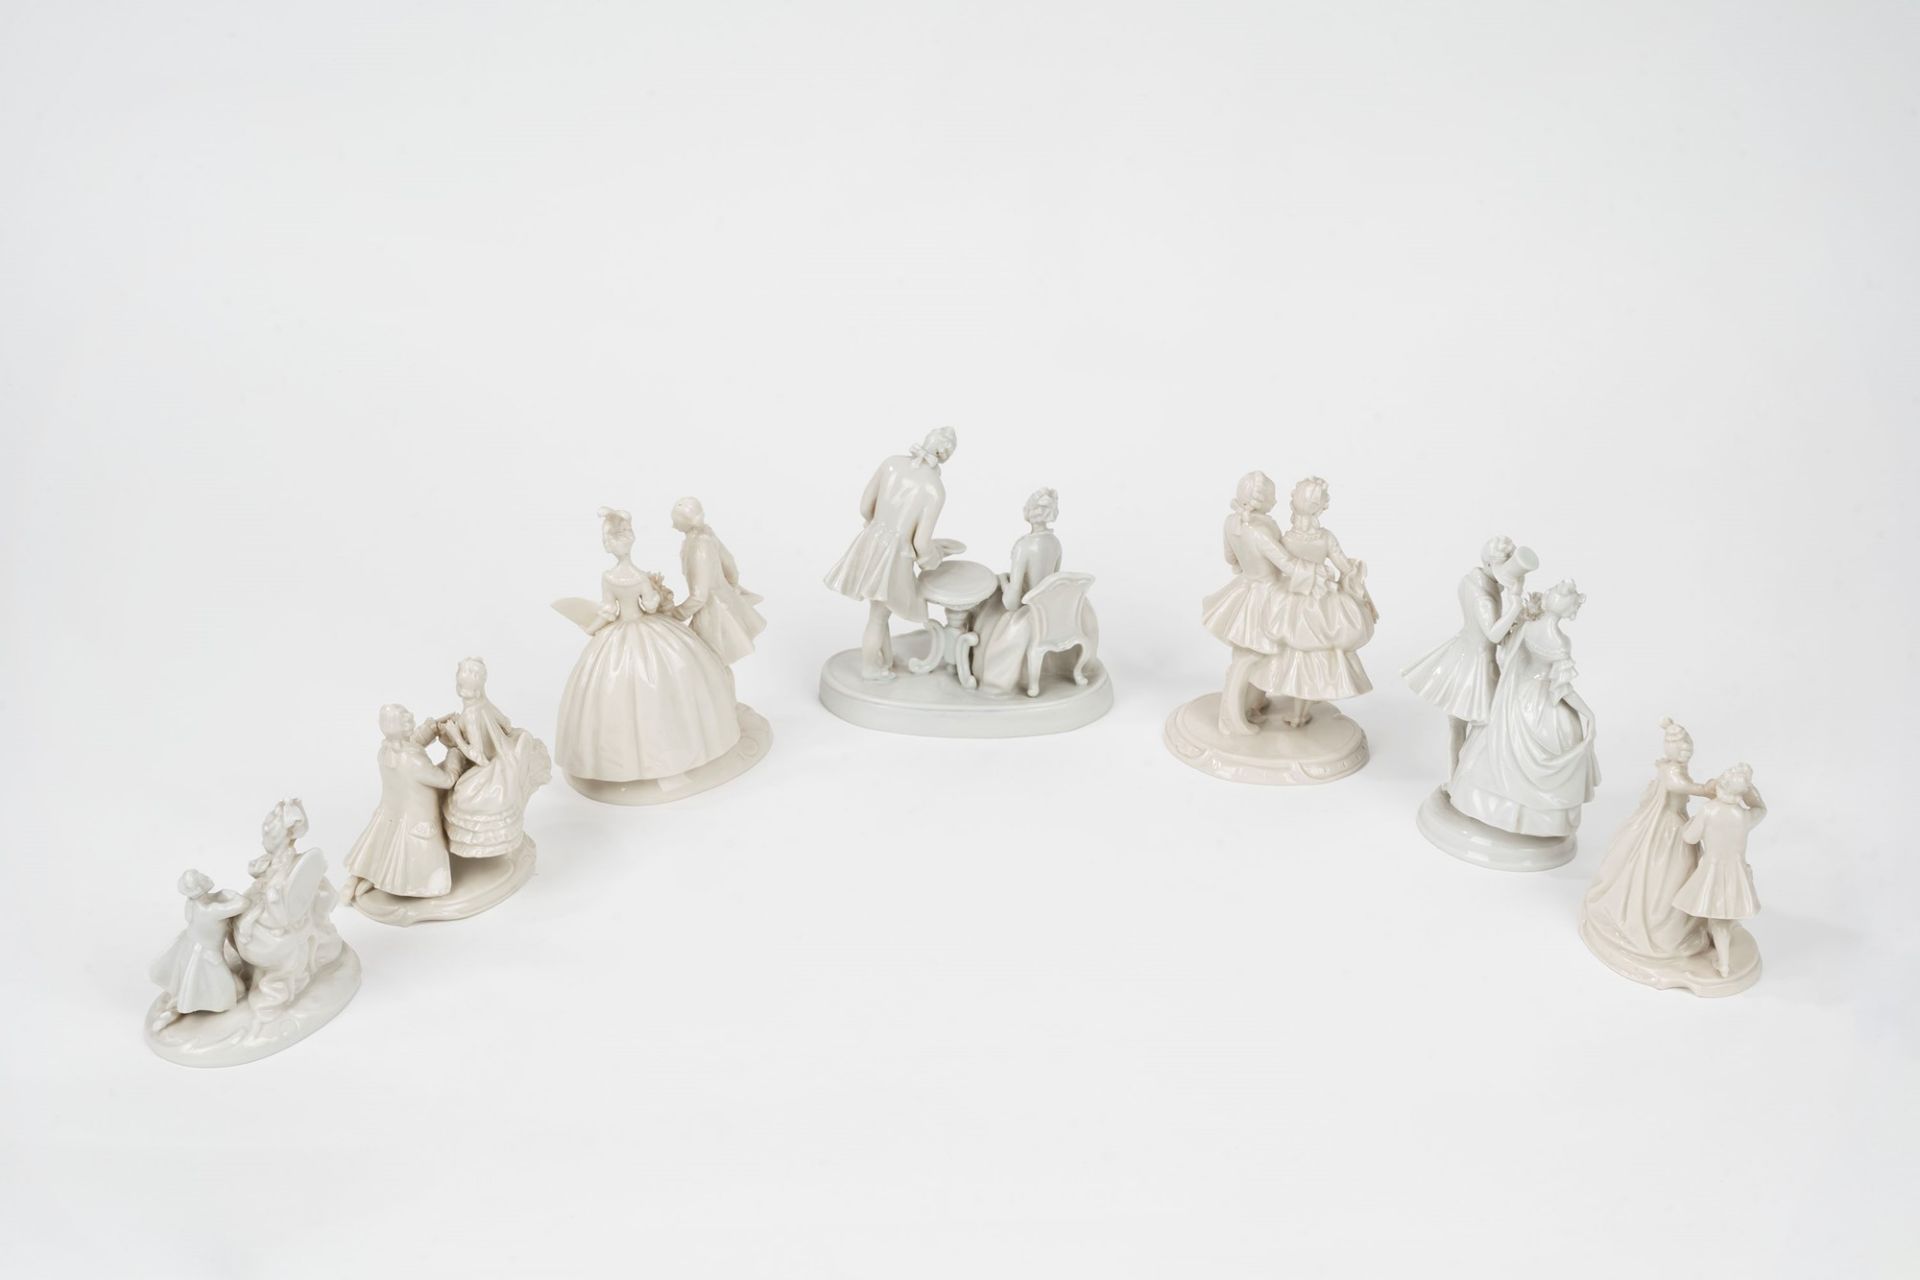 Lot consisting of seven white porcelain sculptures, 20th century - Image 2 of 10